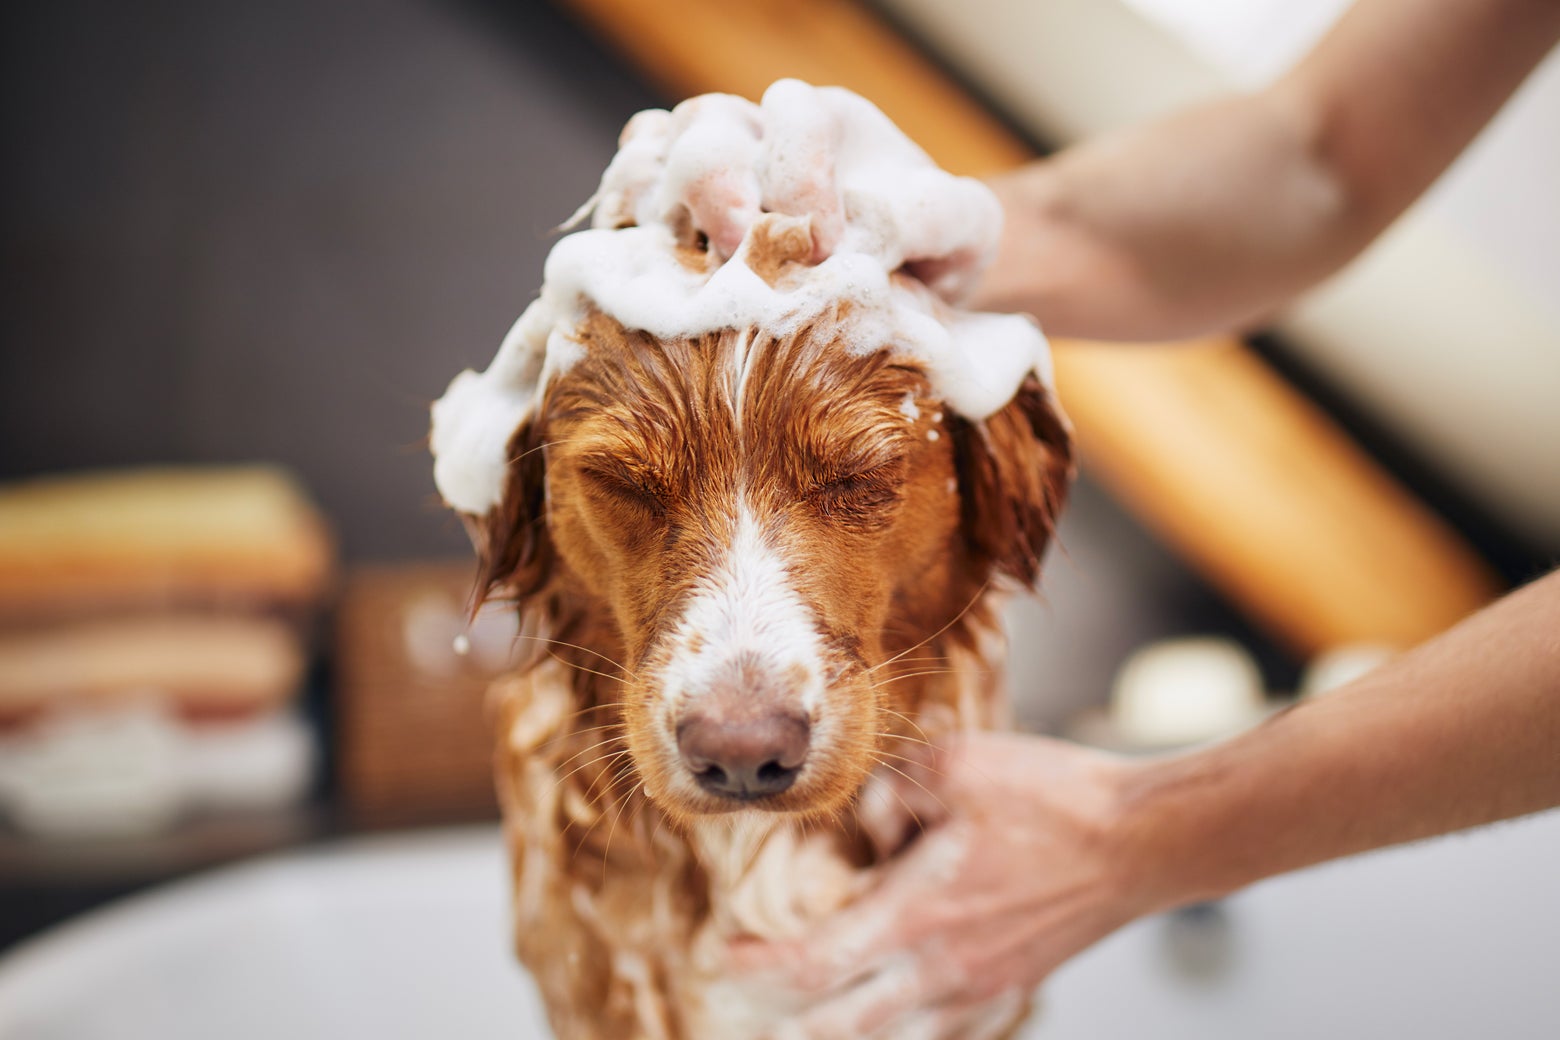 Luxury skincare for dogs is a thing. Here’s what to know about dog shampoo and paw care.